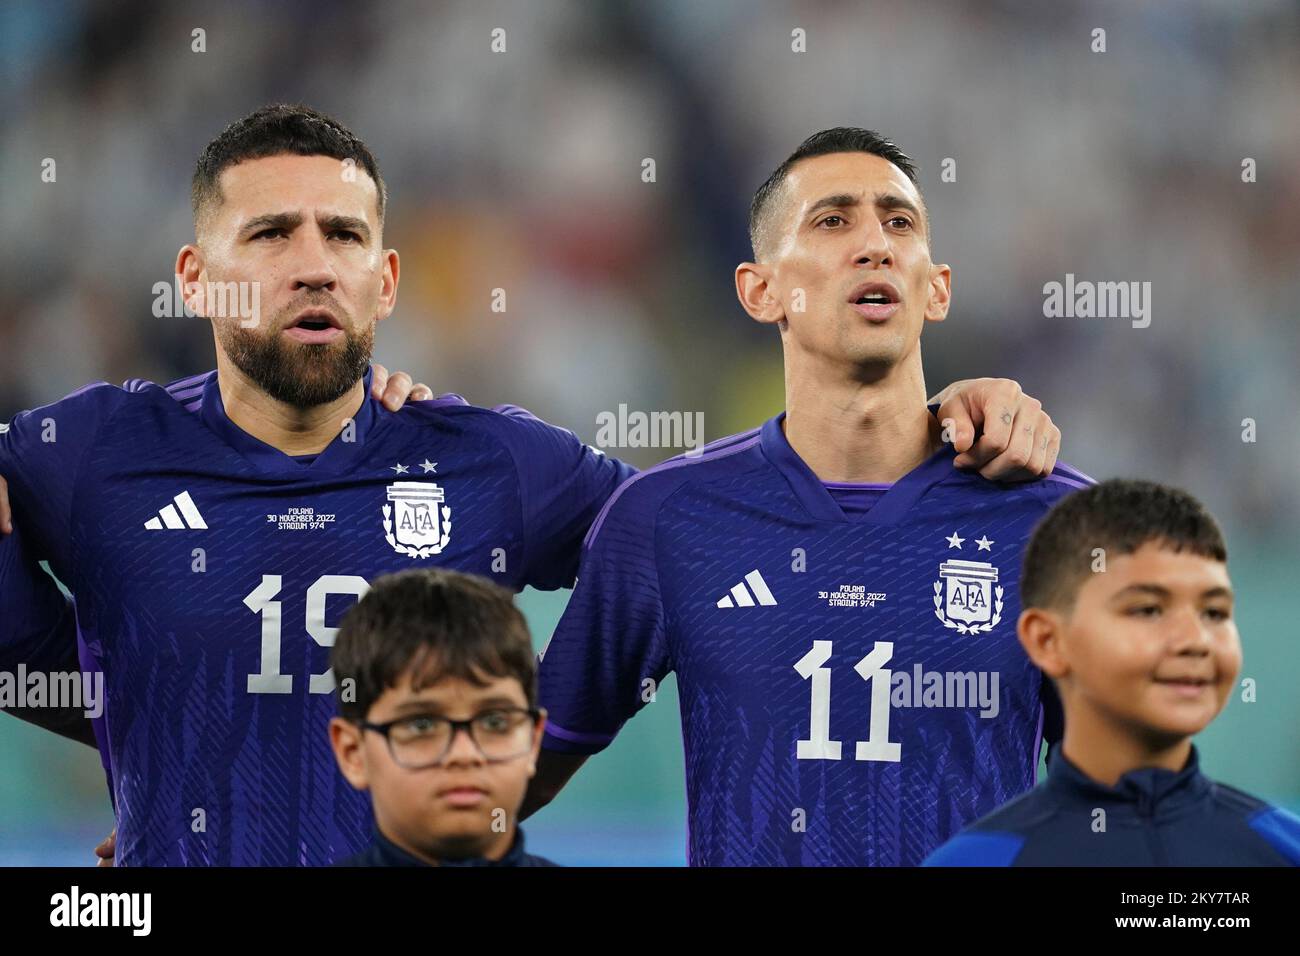 DOHA, QATAR - NOVEMBER 30: Player of Argentina Nicolás Otamendi and Ángel Di María sing the national anthem before the FIFA World Cup Qatar 2022 group C match between Argentina and Poland at Stadium 974 on November 30, 2022 in Doha, Qatar. (Photo by Florencia Tan Jun/PxImages) Credit: Px Images/Alamy Live News Stock Photo